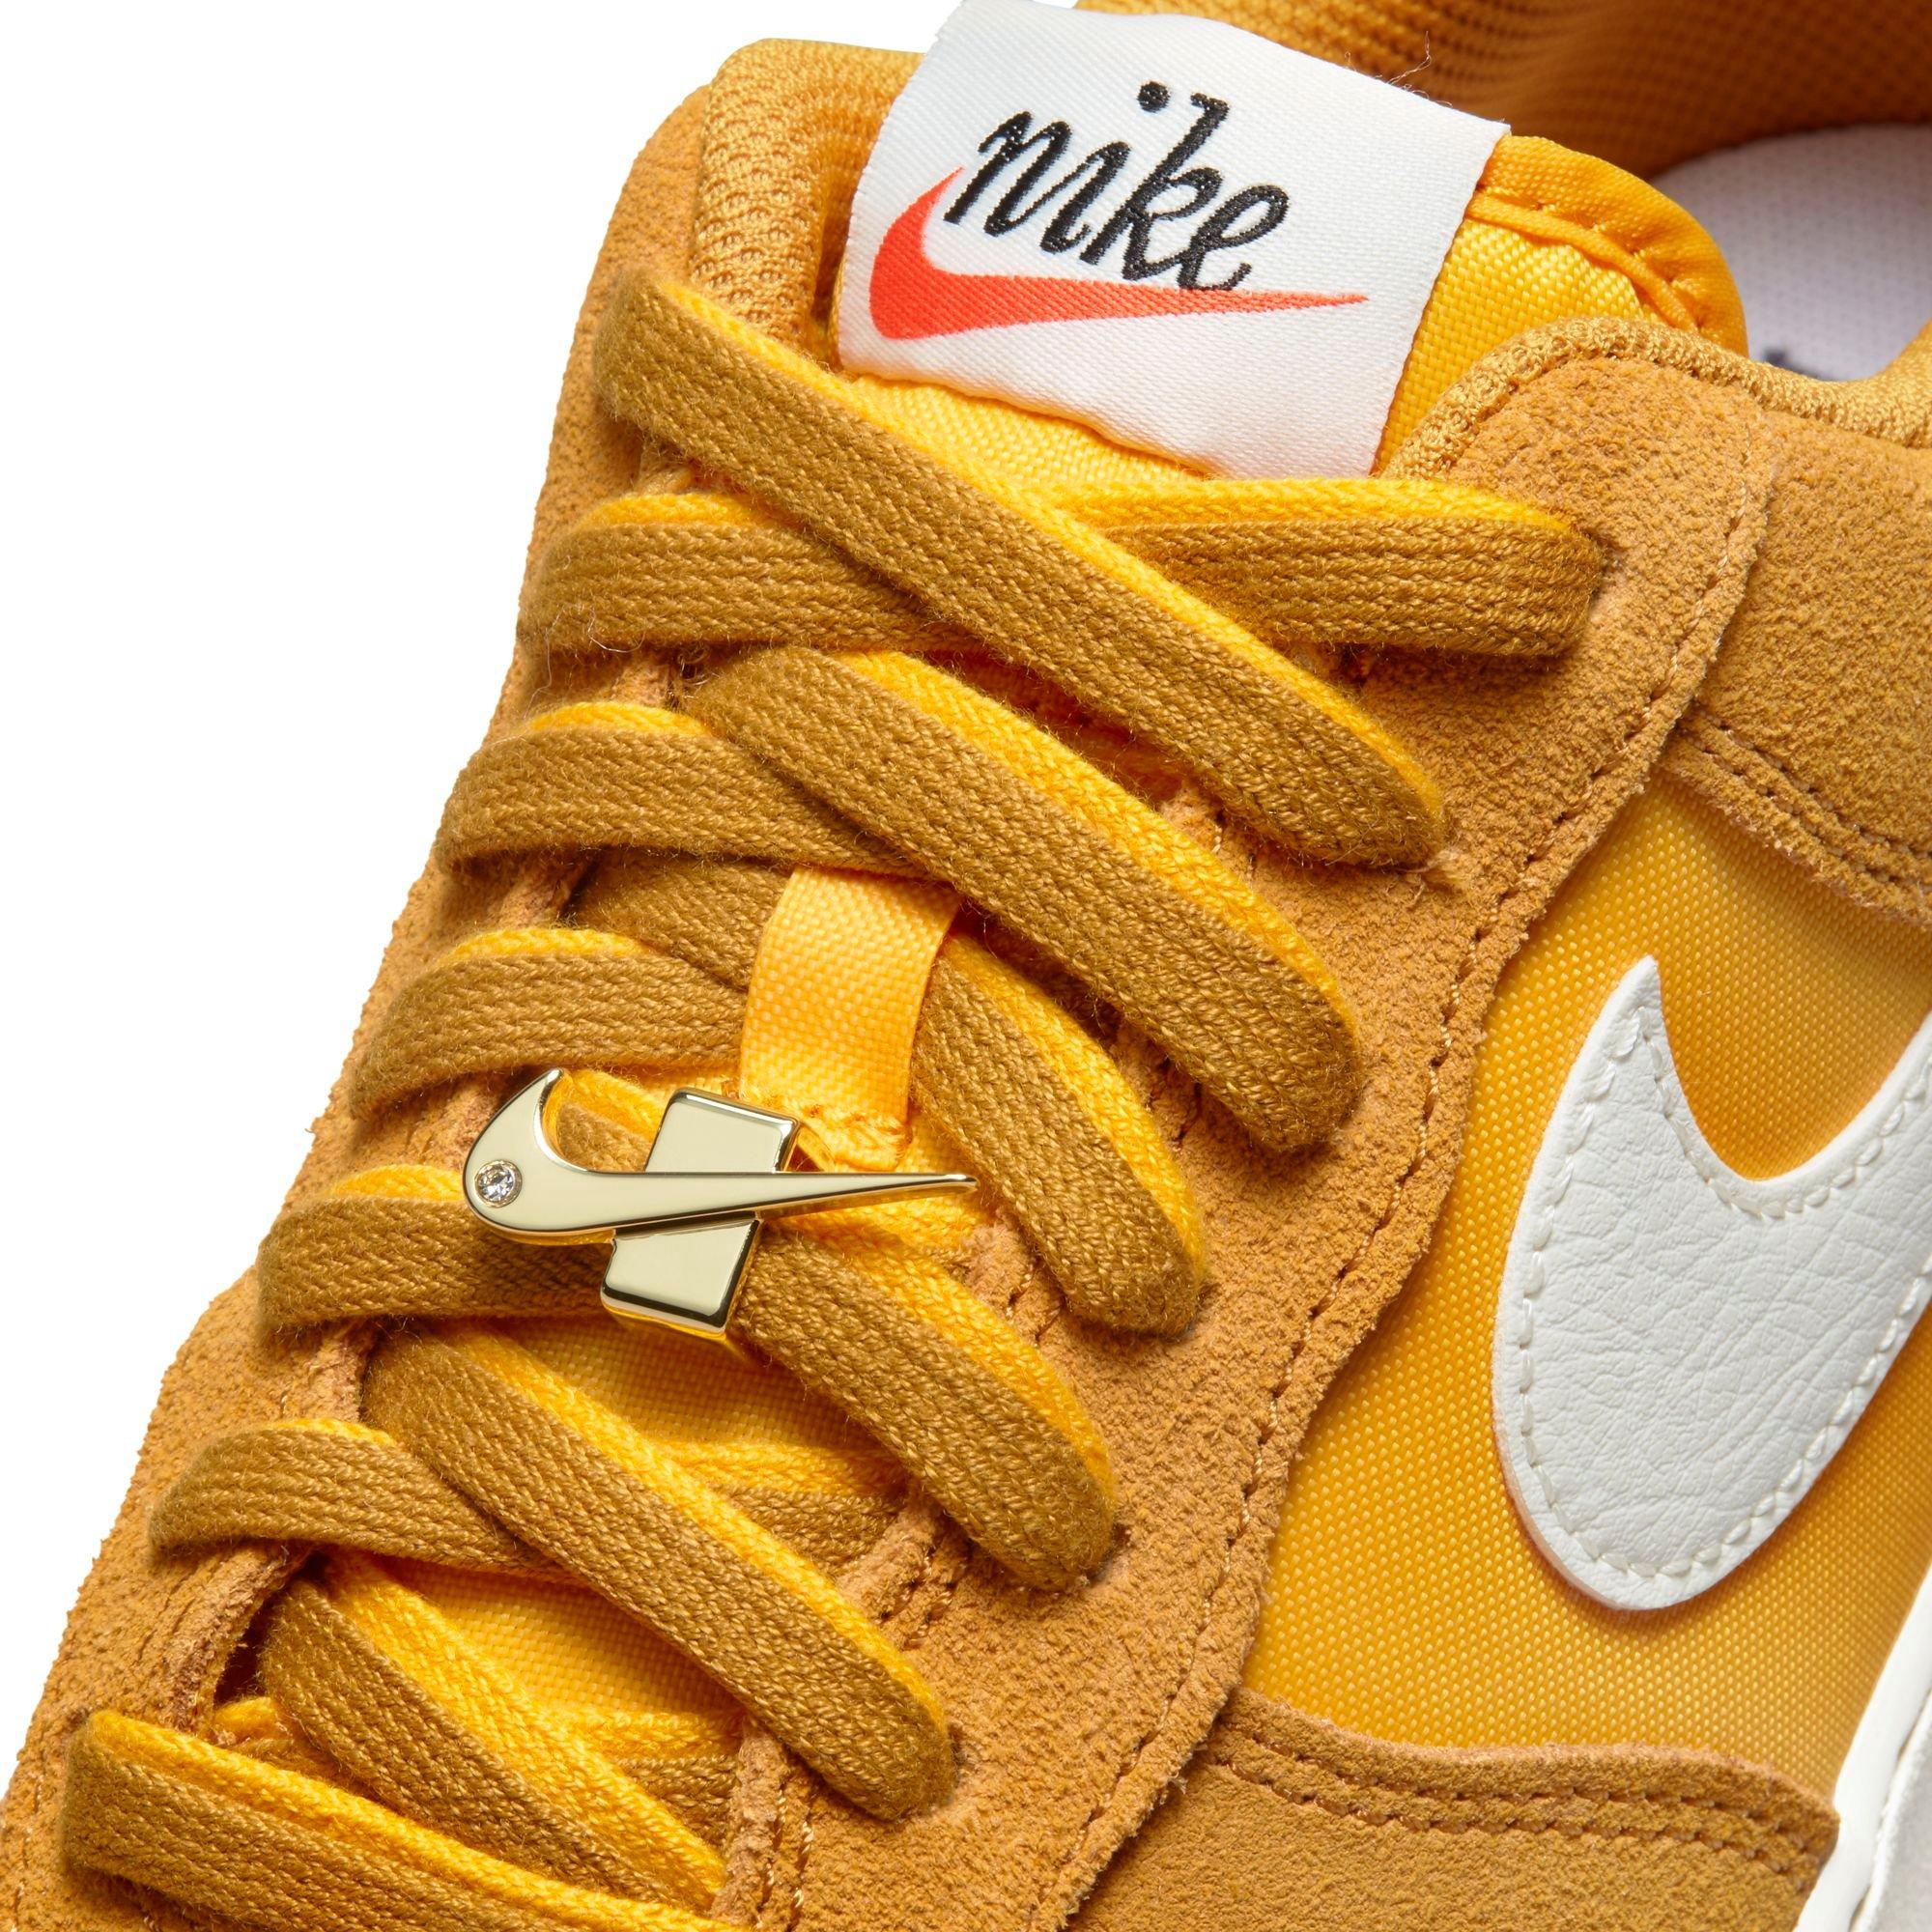 Nike Air Force 1 '07 LV8 Sail / White / University Gold / University Gold  Low Top Sneakers - Sneak in Peace